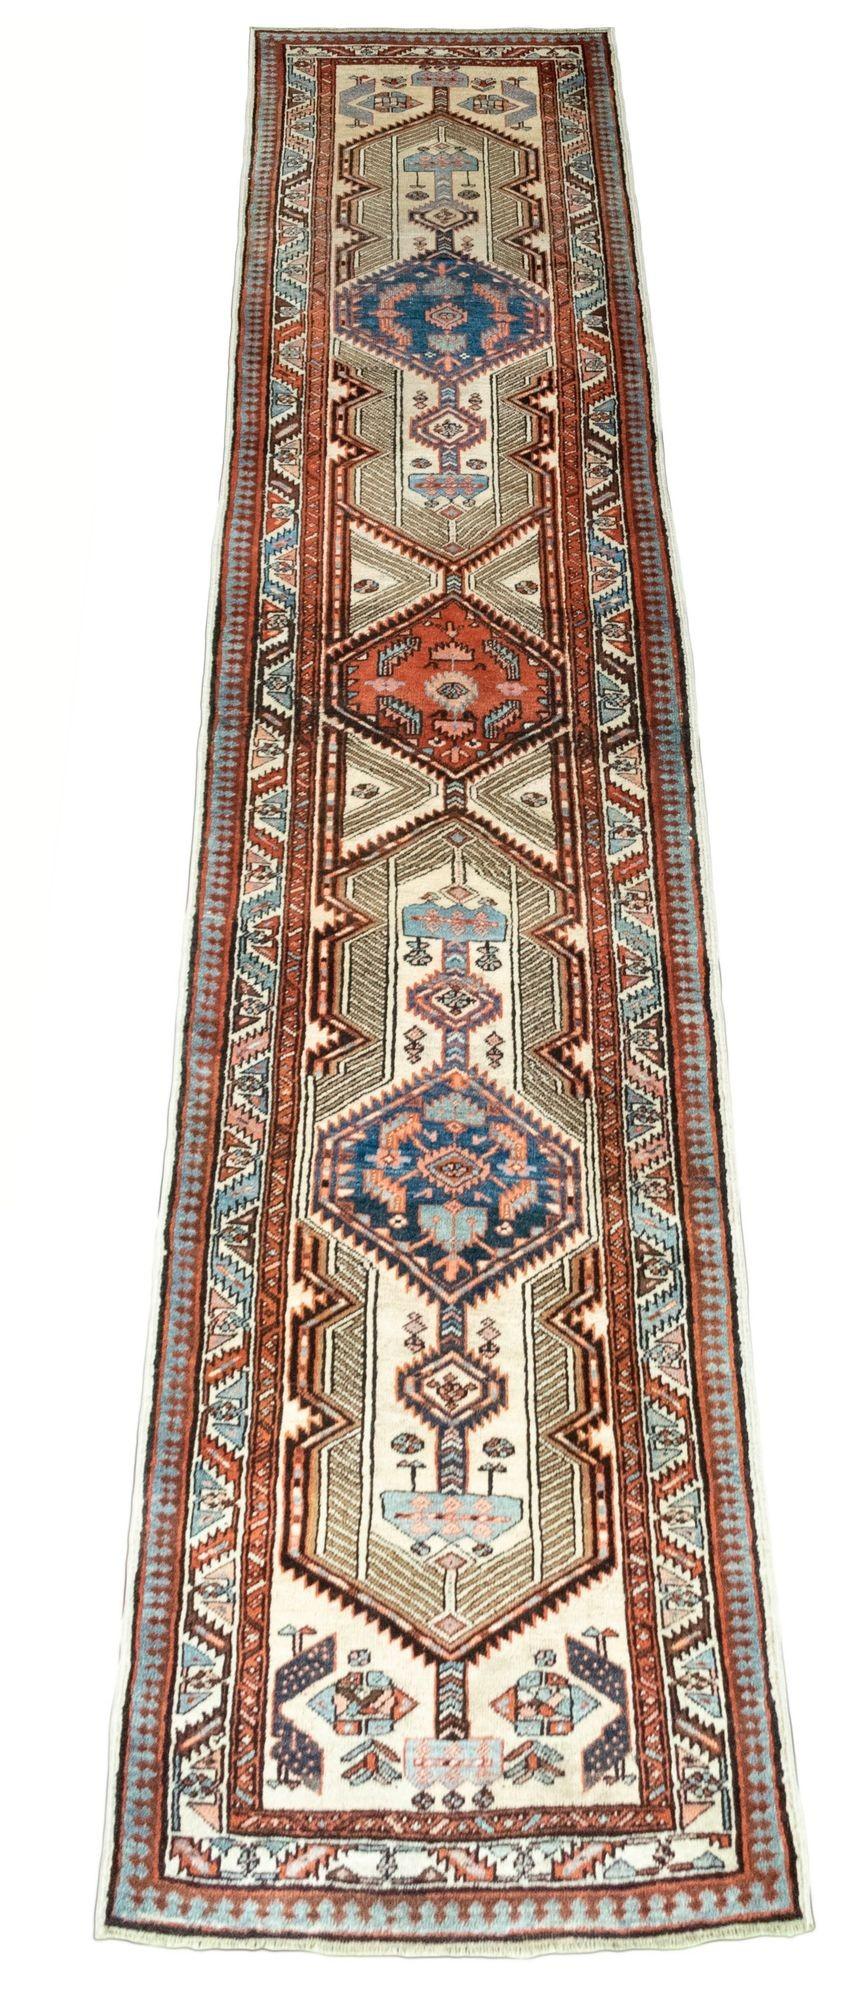 A beautiful vintage Sarab runner, handwoven circa 1920. The design features 3 geometrical medallions on an ivory field and similar border with secondary colours of blues, reds and pinks.
Size: 4.29m x 0.90m (14ft 1in x 3ft)
This rug is in good